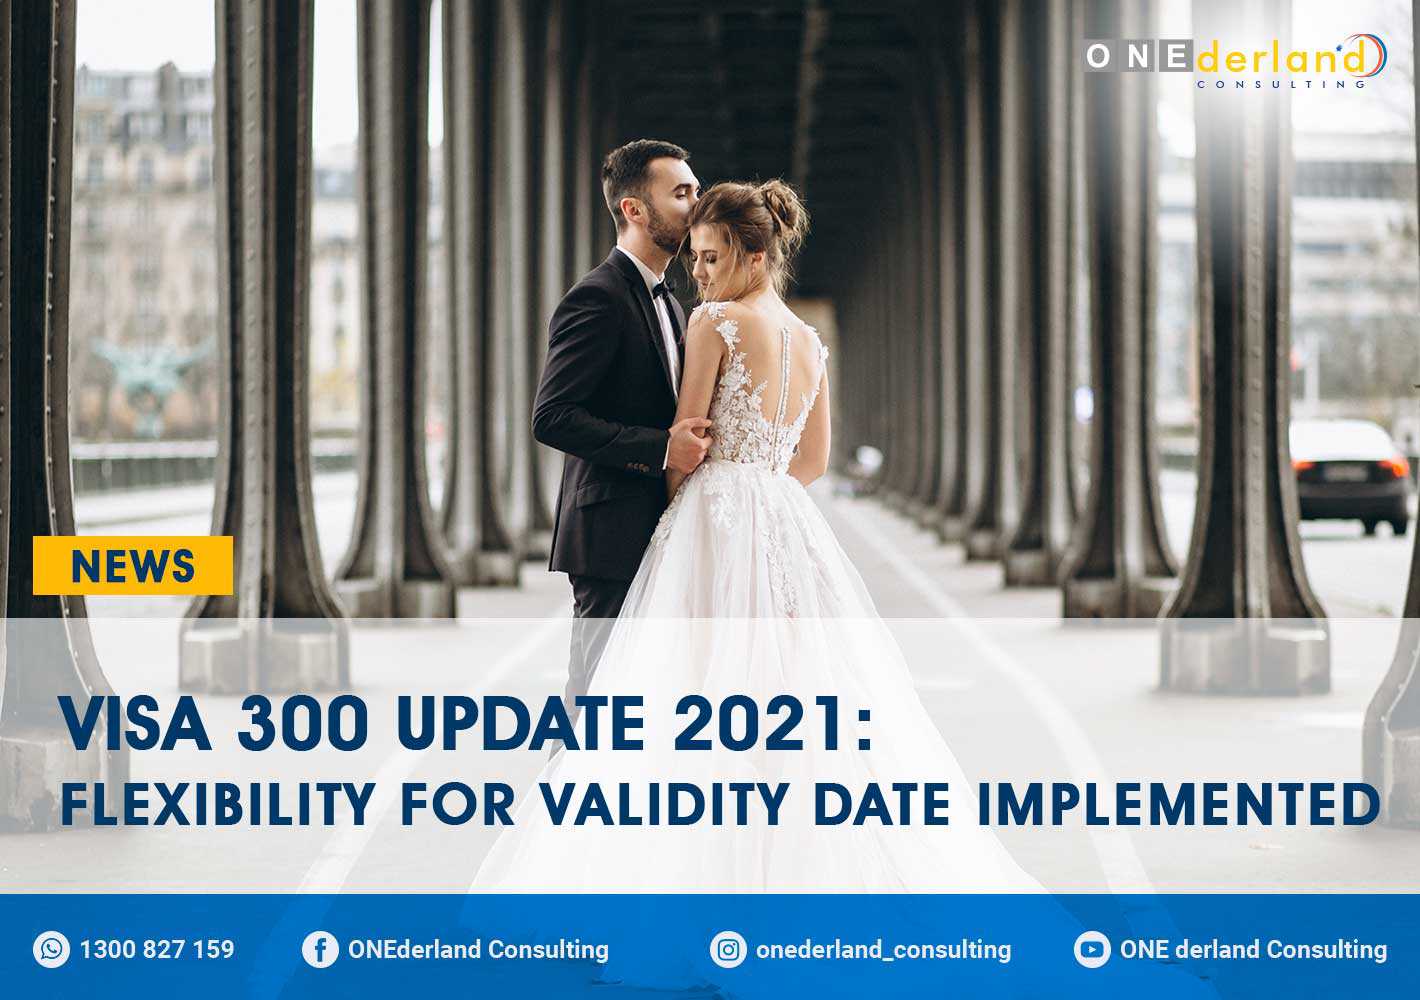 Visa 300 Update 2021 Flexibility for Validity Date Implemented